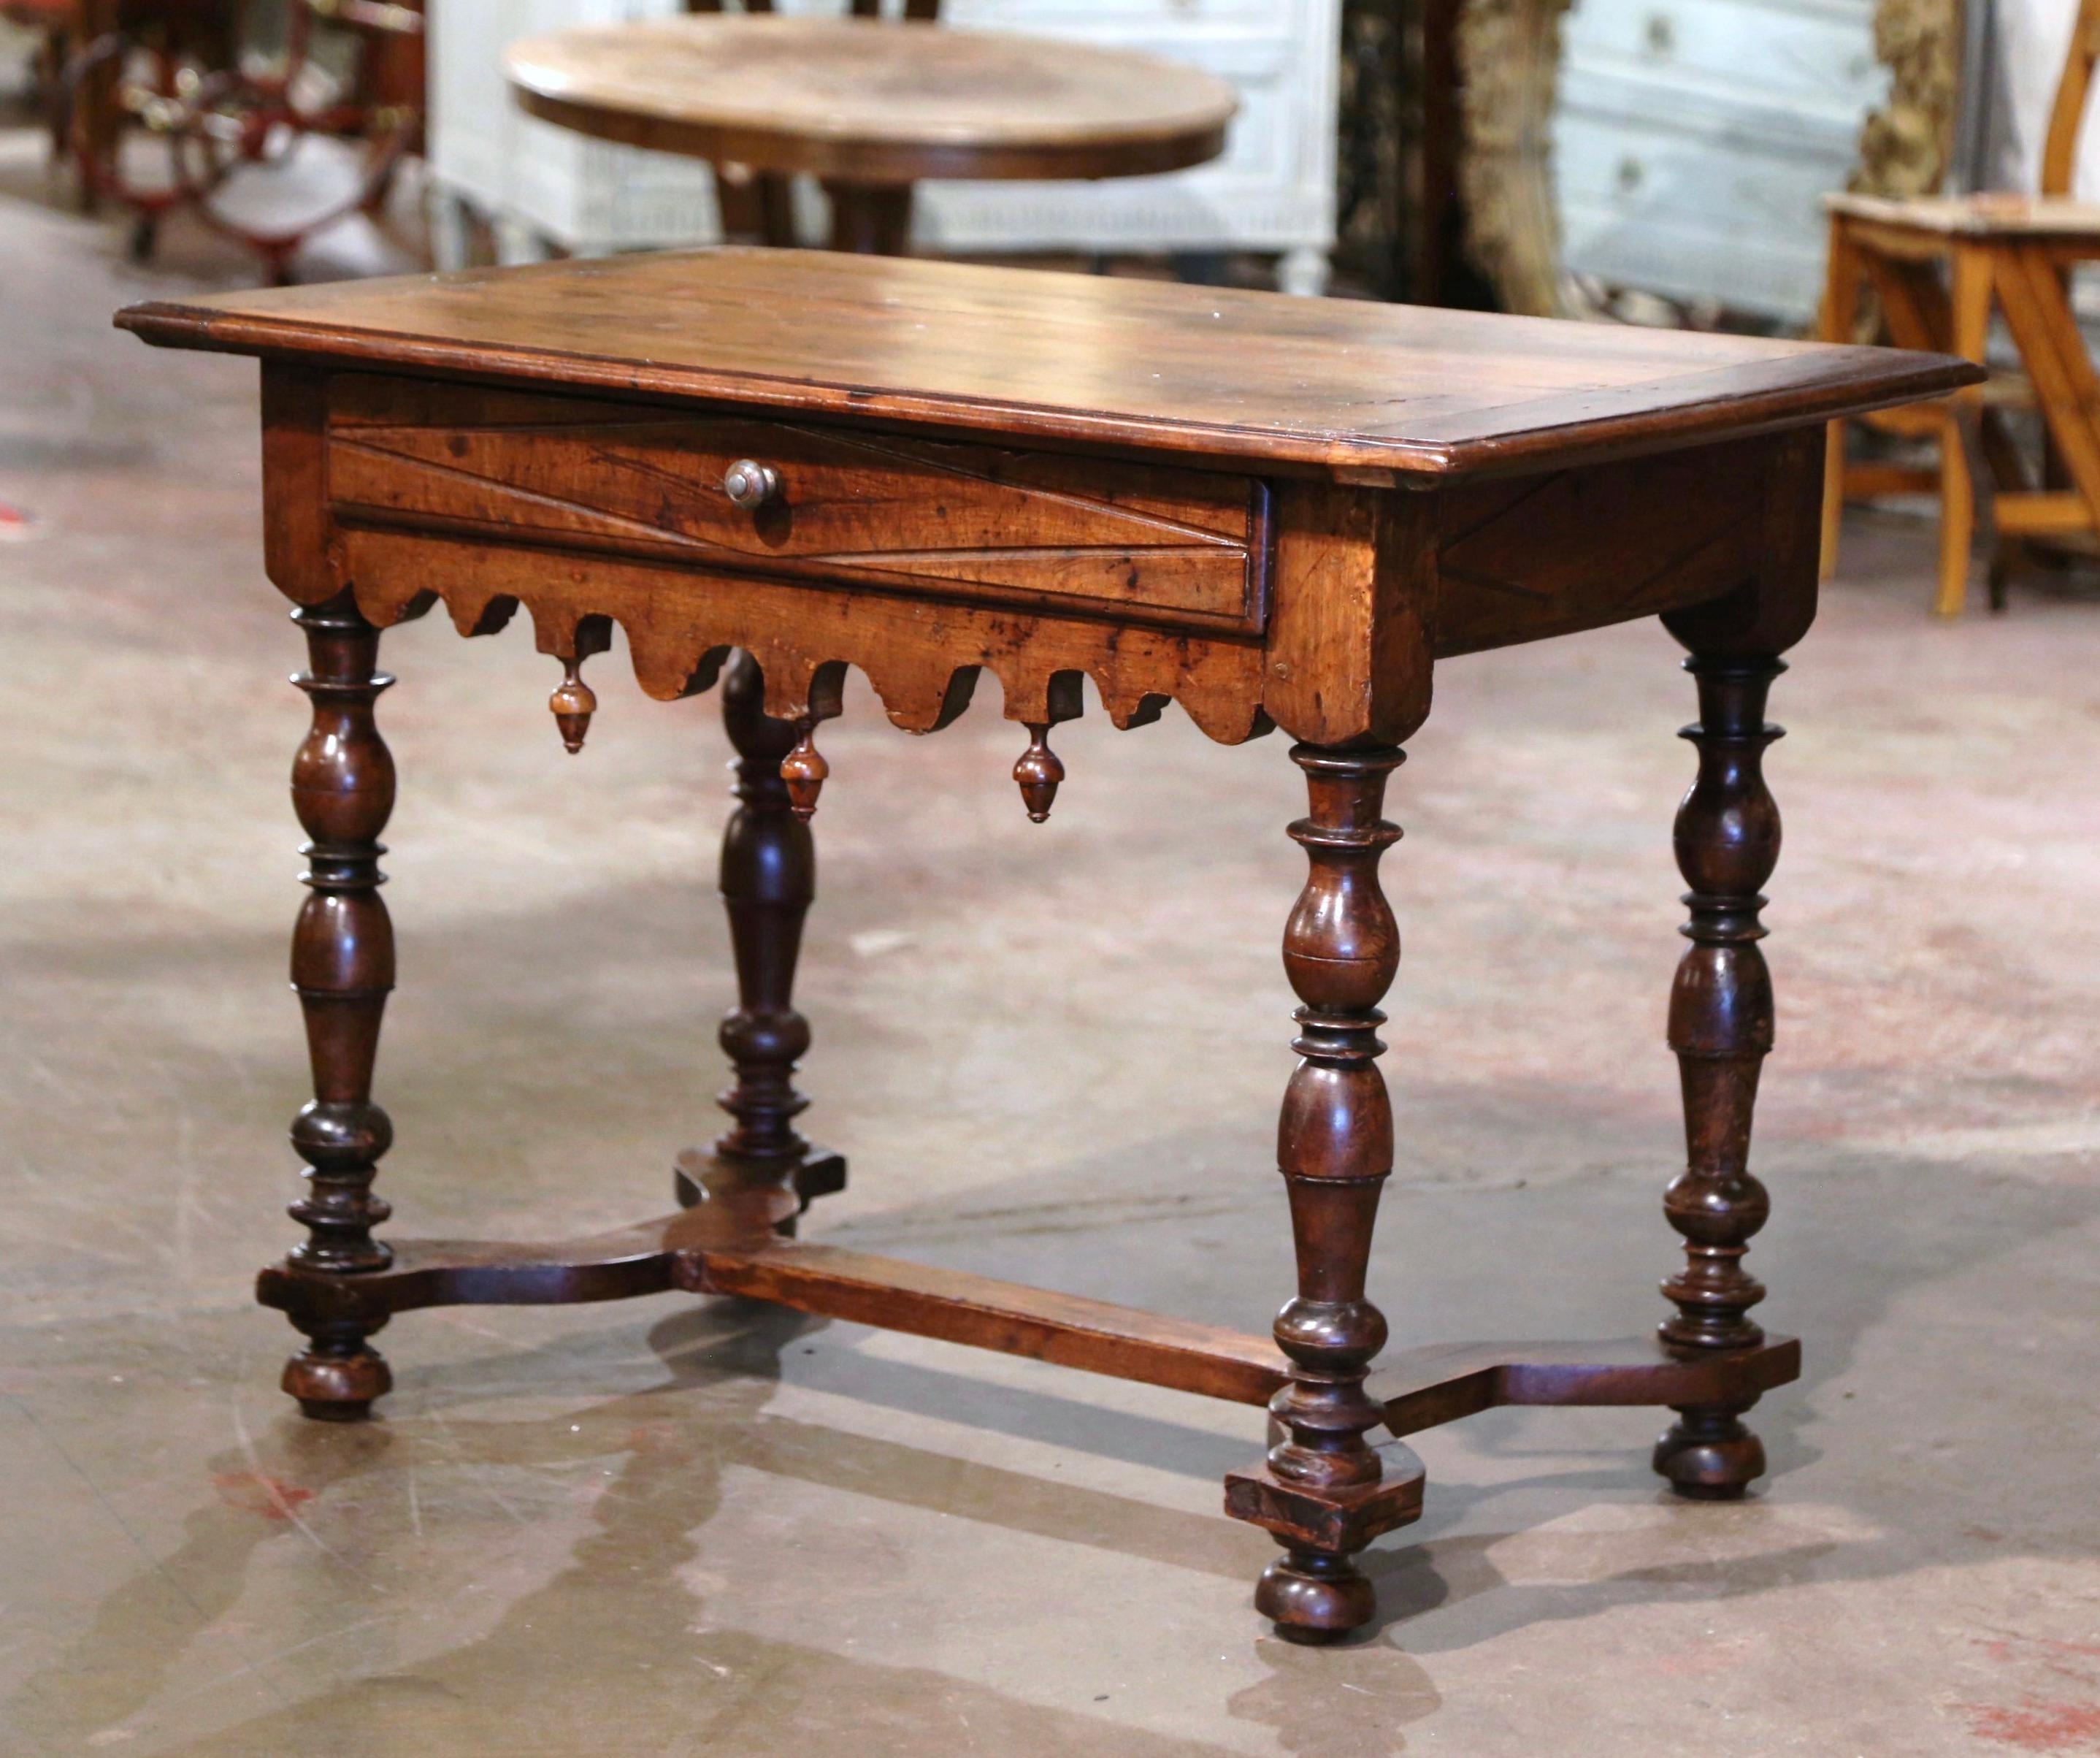 Crafted in the Perigord region of France, circa 1670, the antique table stands on four thick carved turned legs ending with bun feet, and embellished with an elegant curved stretcher at the base. The side table features a large drawer across the